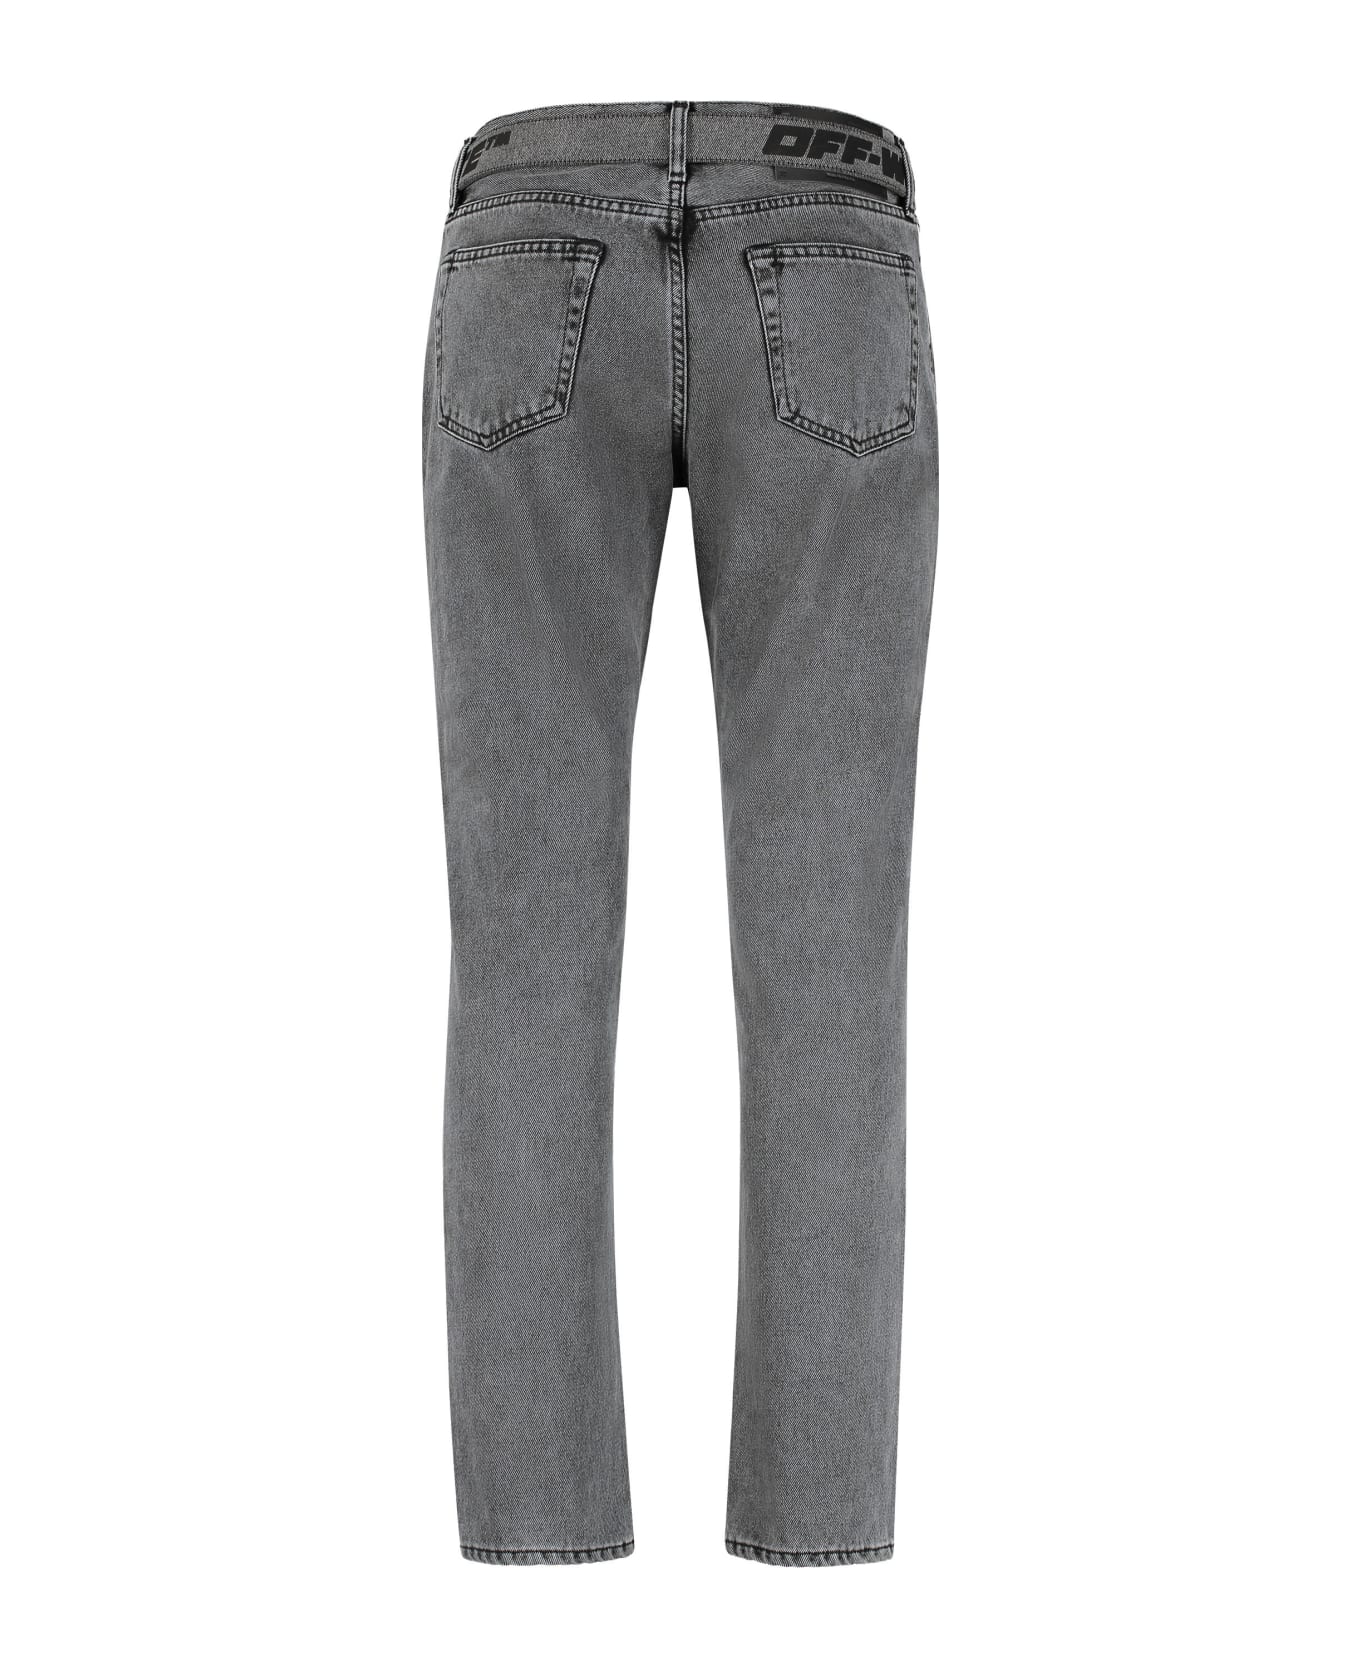 Off-White Belted Skinny Jeans - grey